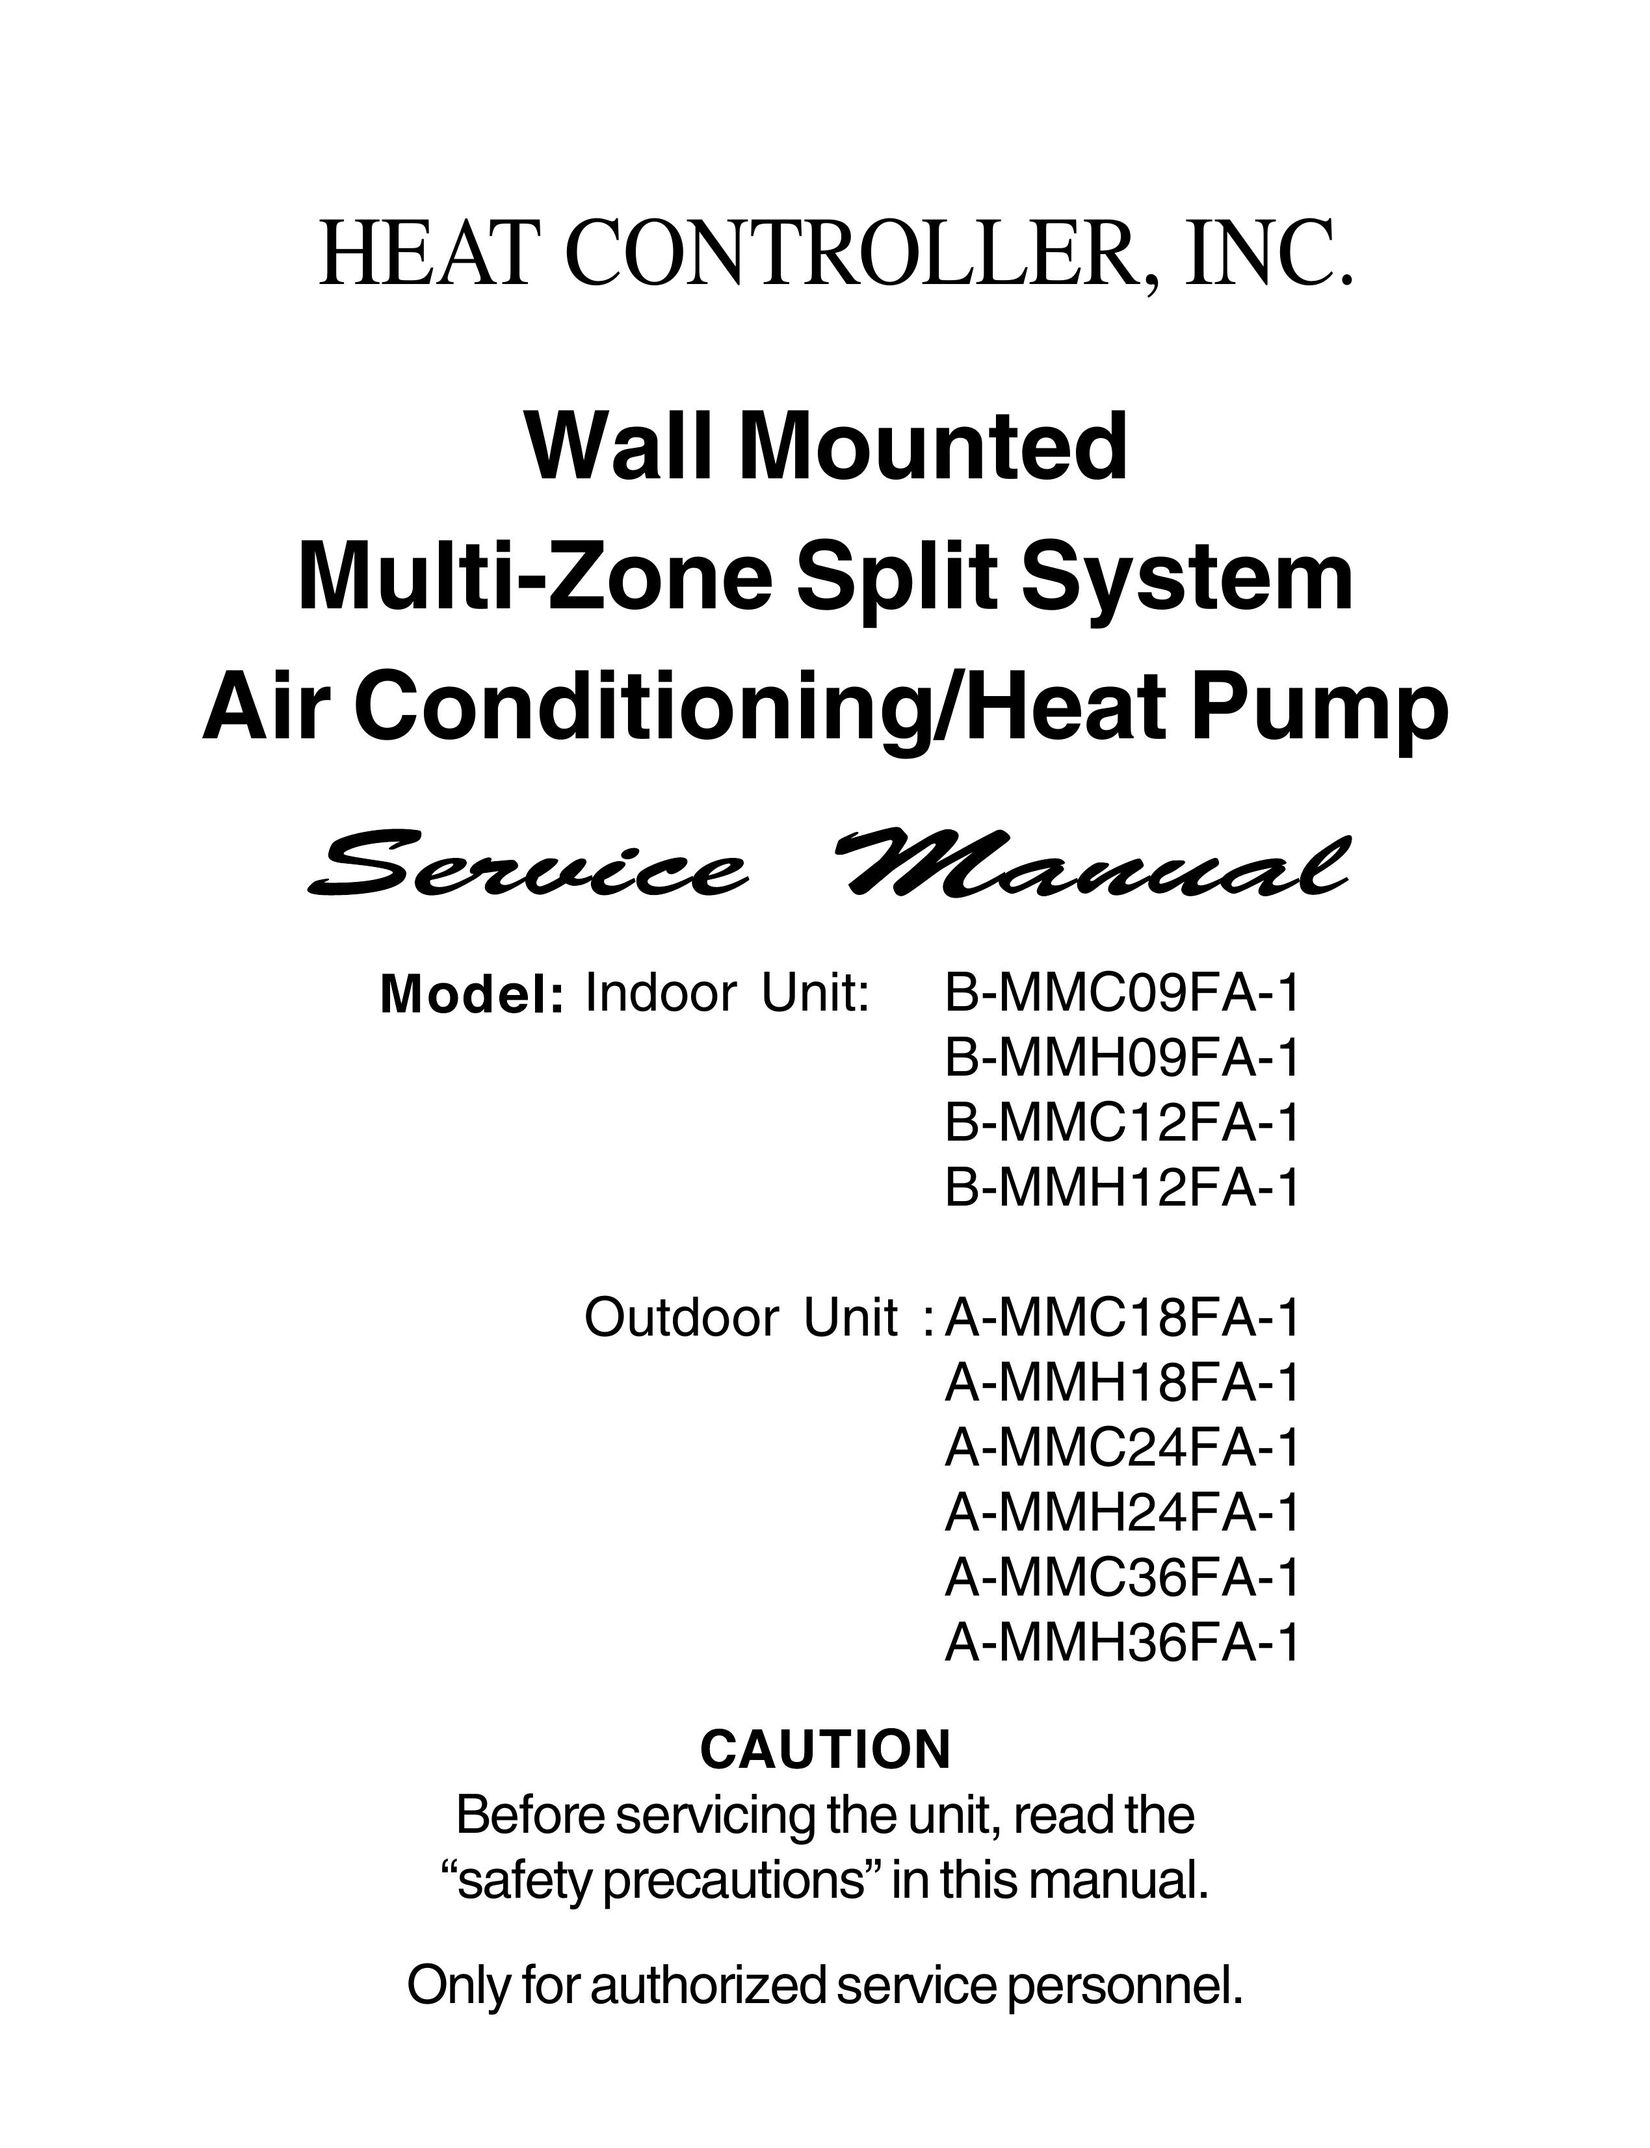 Heat Controller A-MMH18FA-1 Air Conditioner User Manual